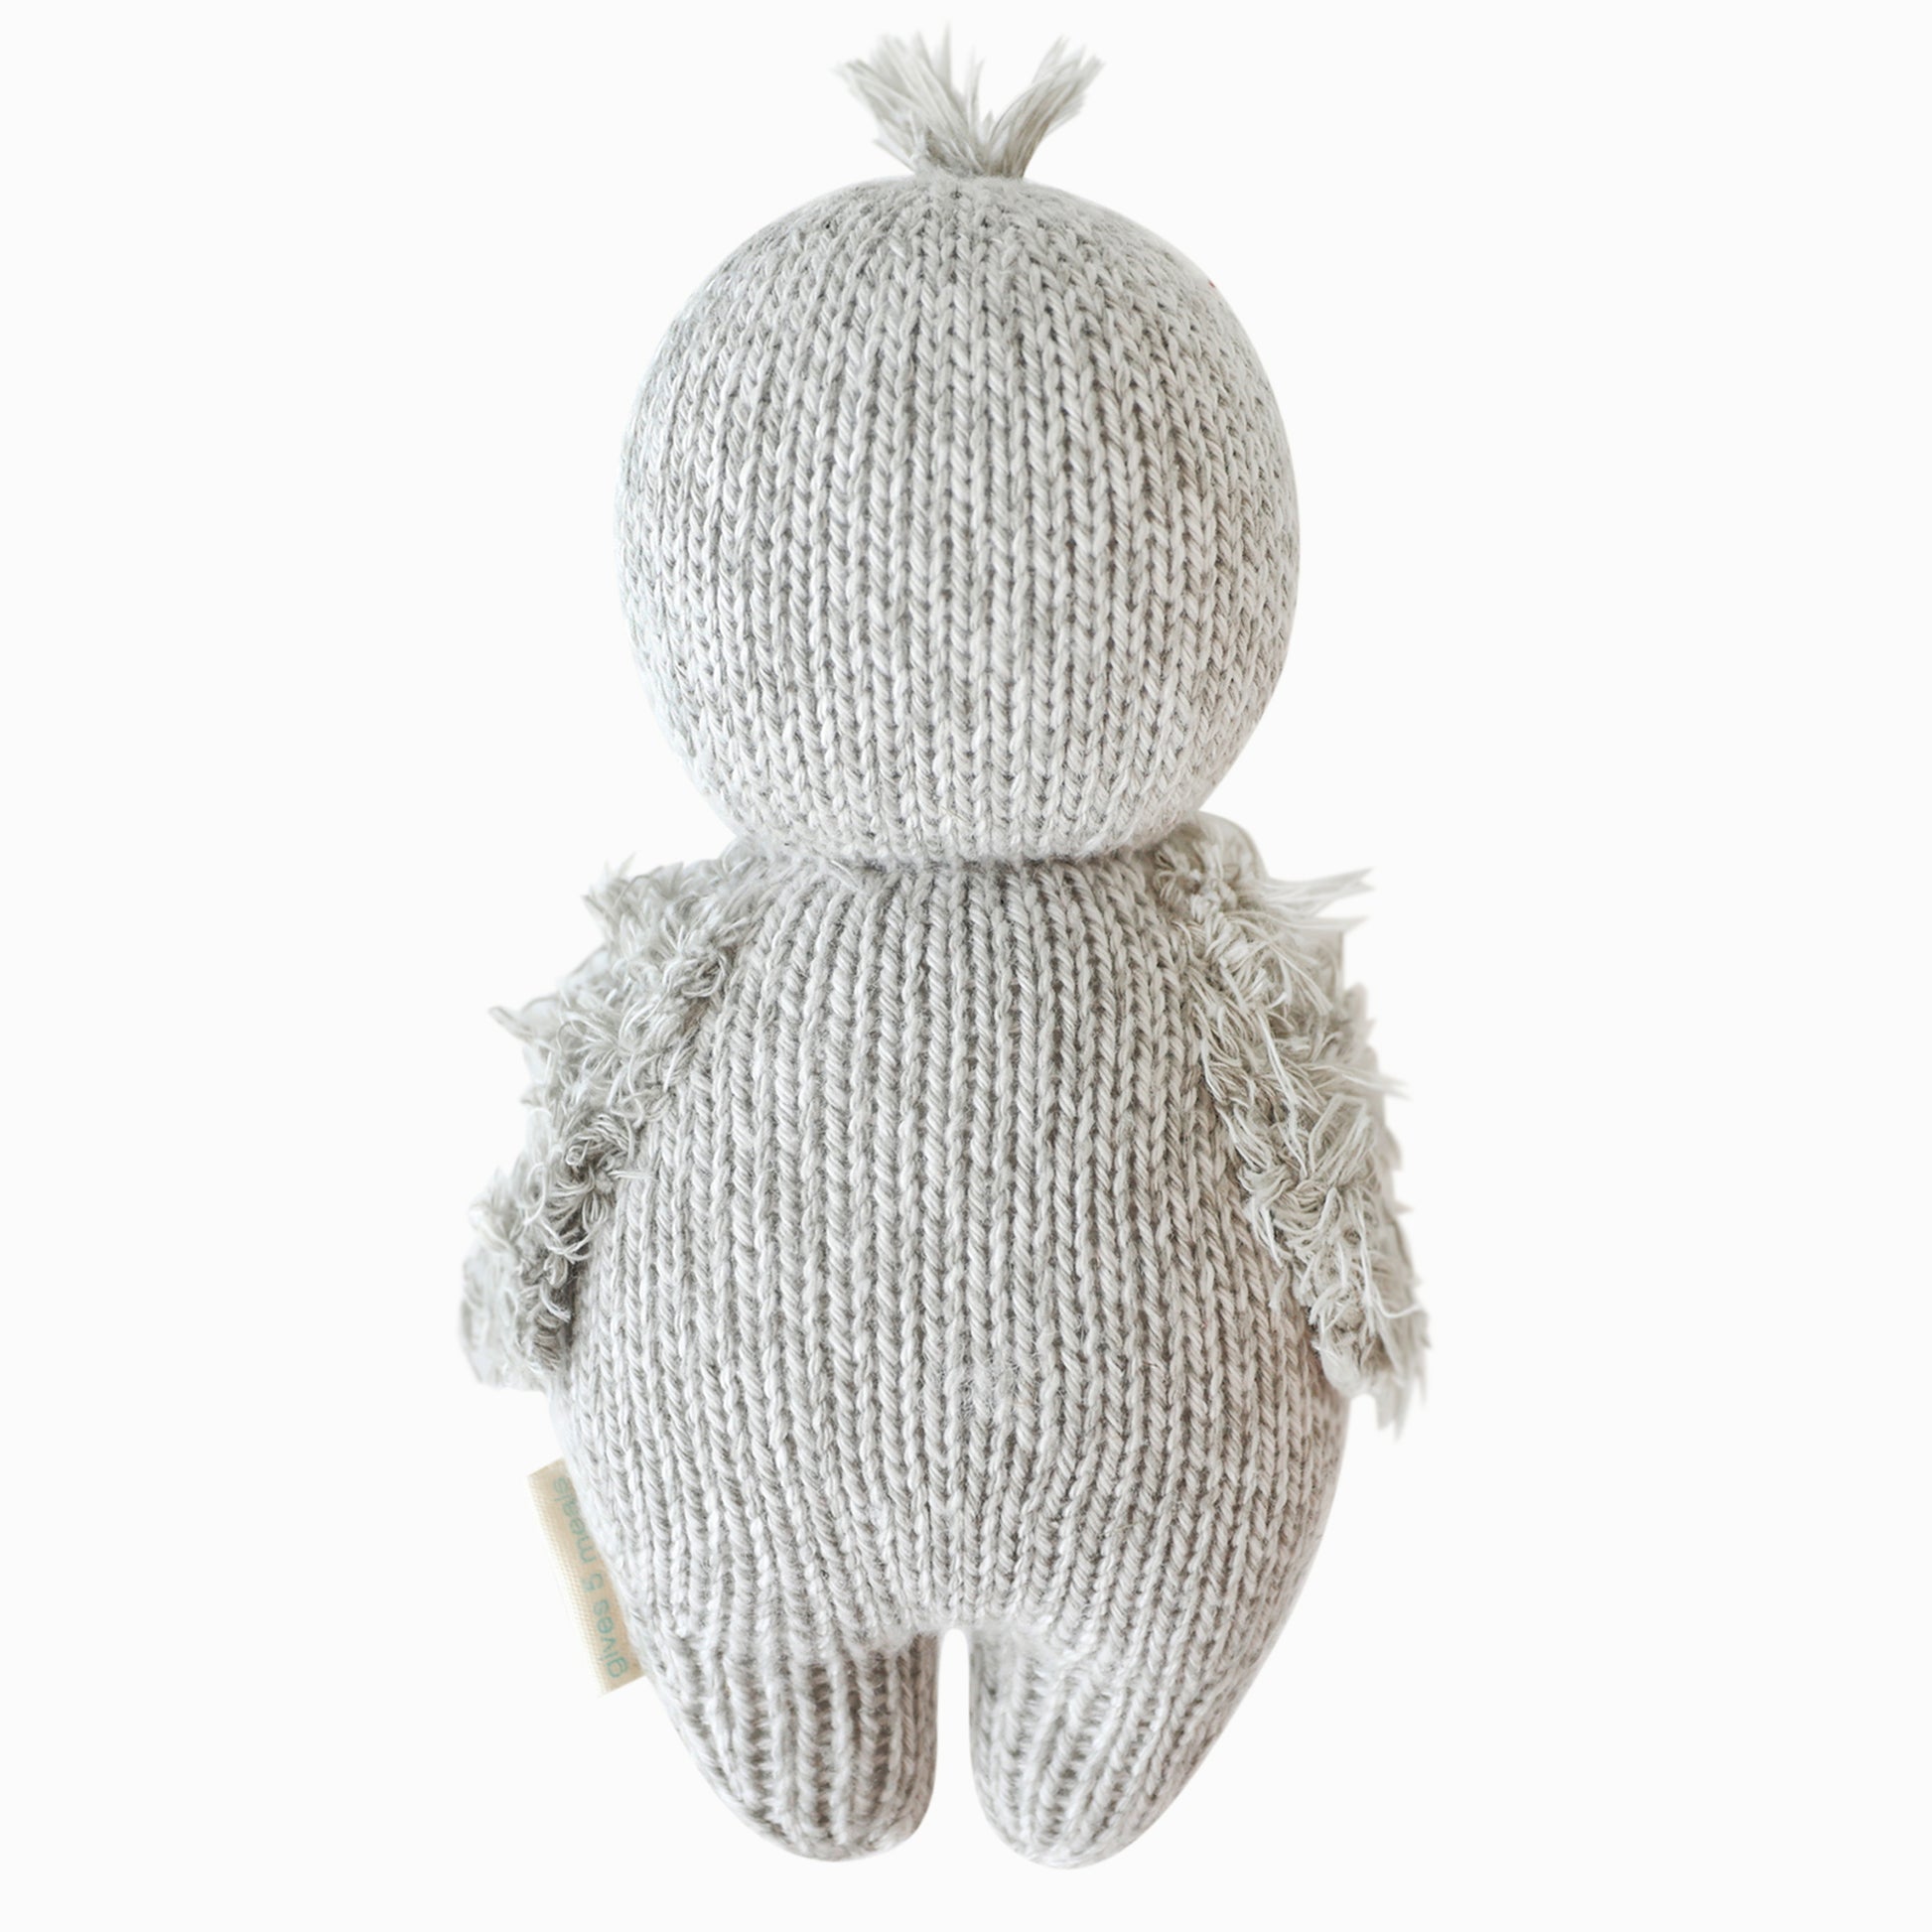 The baby penguin stuffed animal shown from the back.